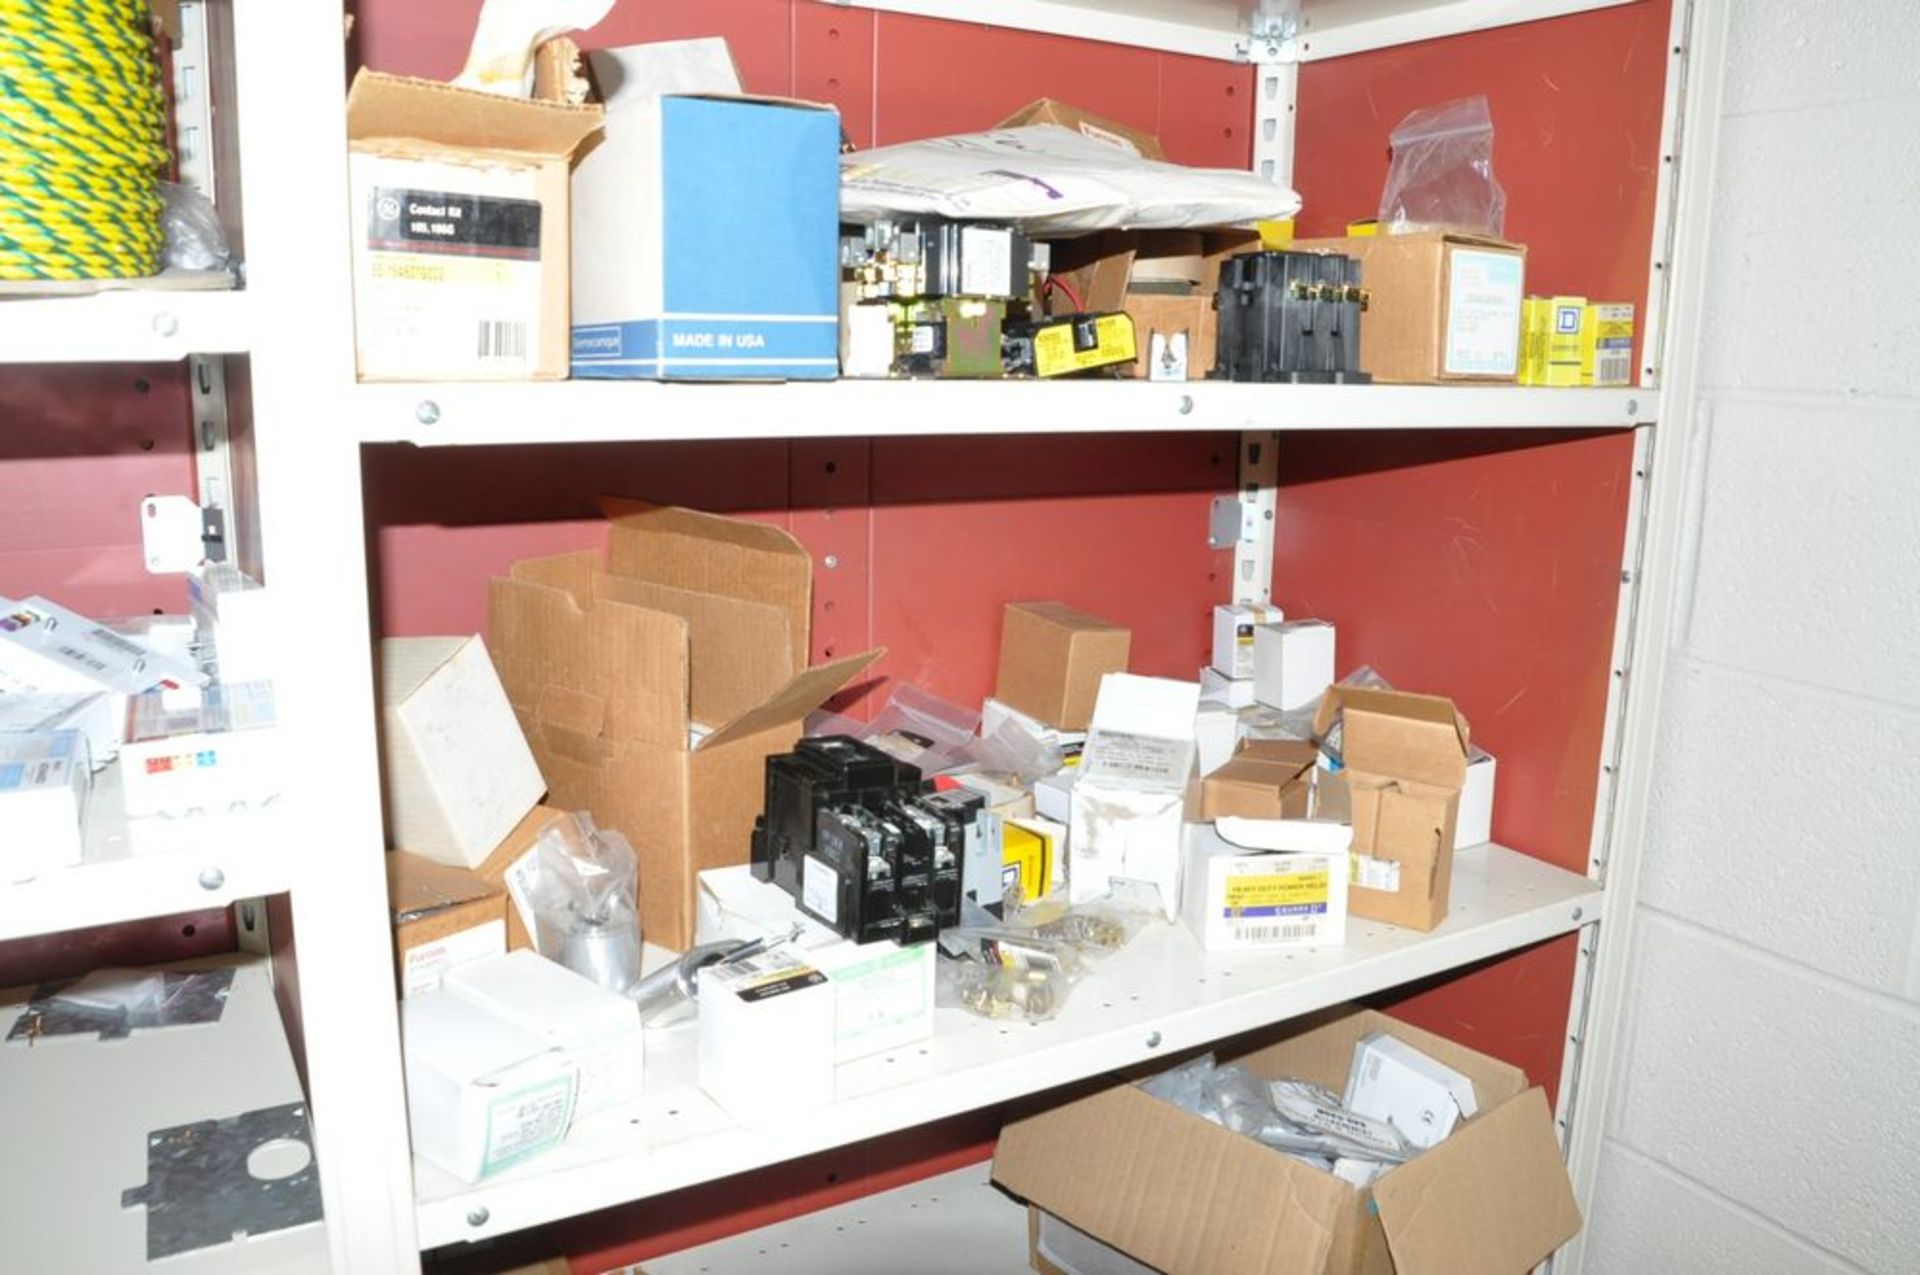 Lot-(5) Sections Shelving with General Maintenance Contents in (1) Group, (Maintenance Shop- - Image 11 of 11